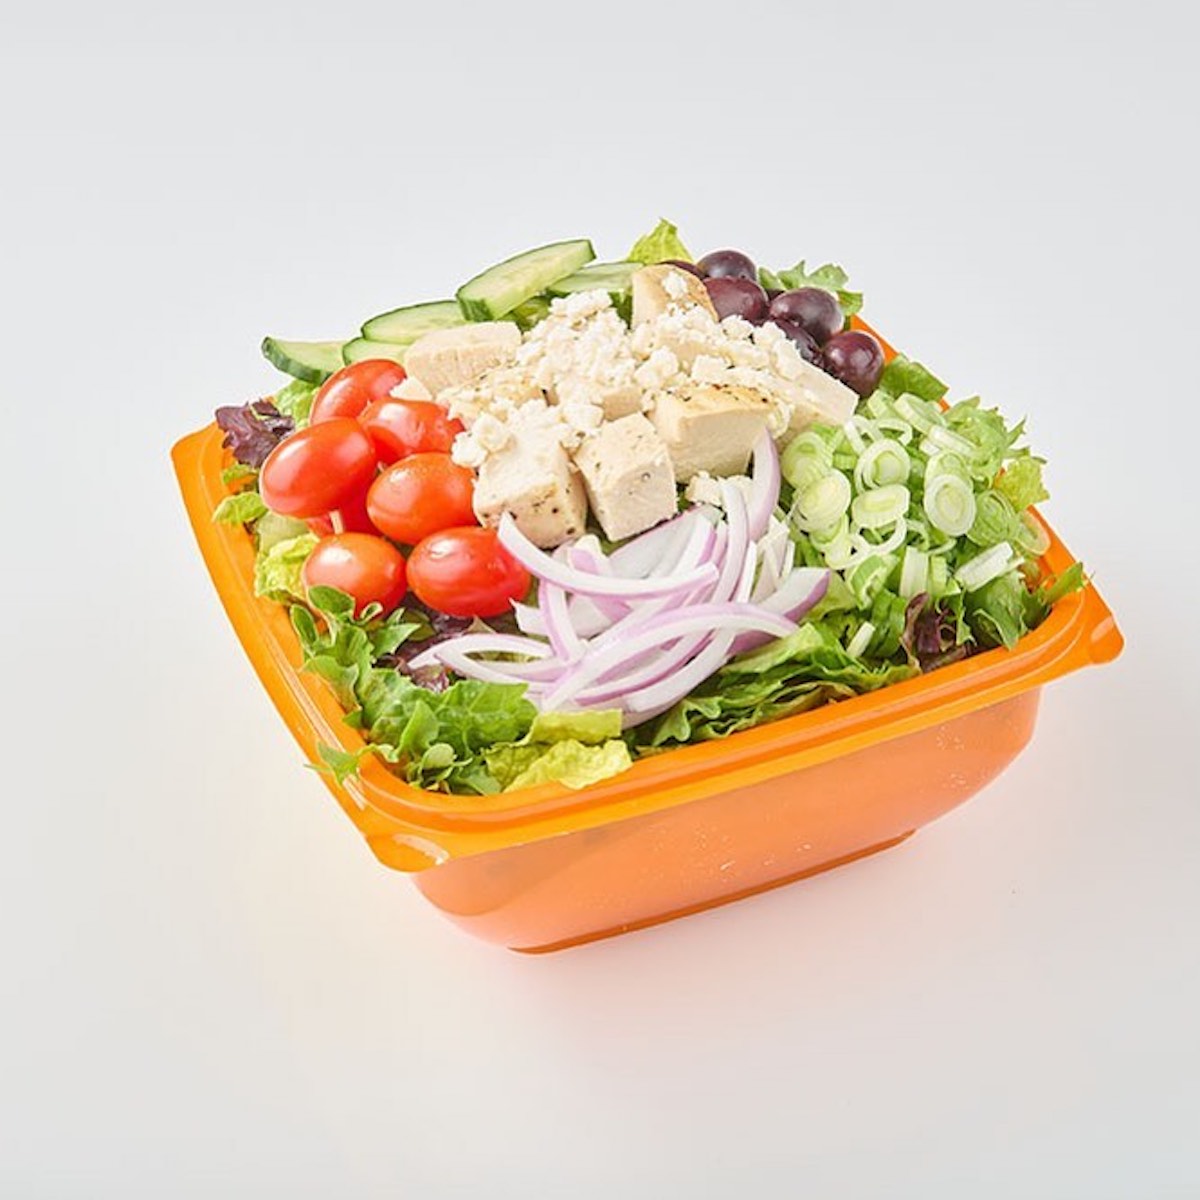 Salad and Go Brings Healthy Food to Plano with Drive-Thru Speed